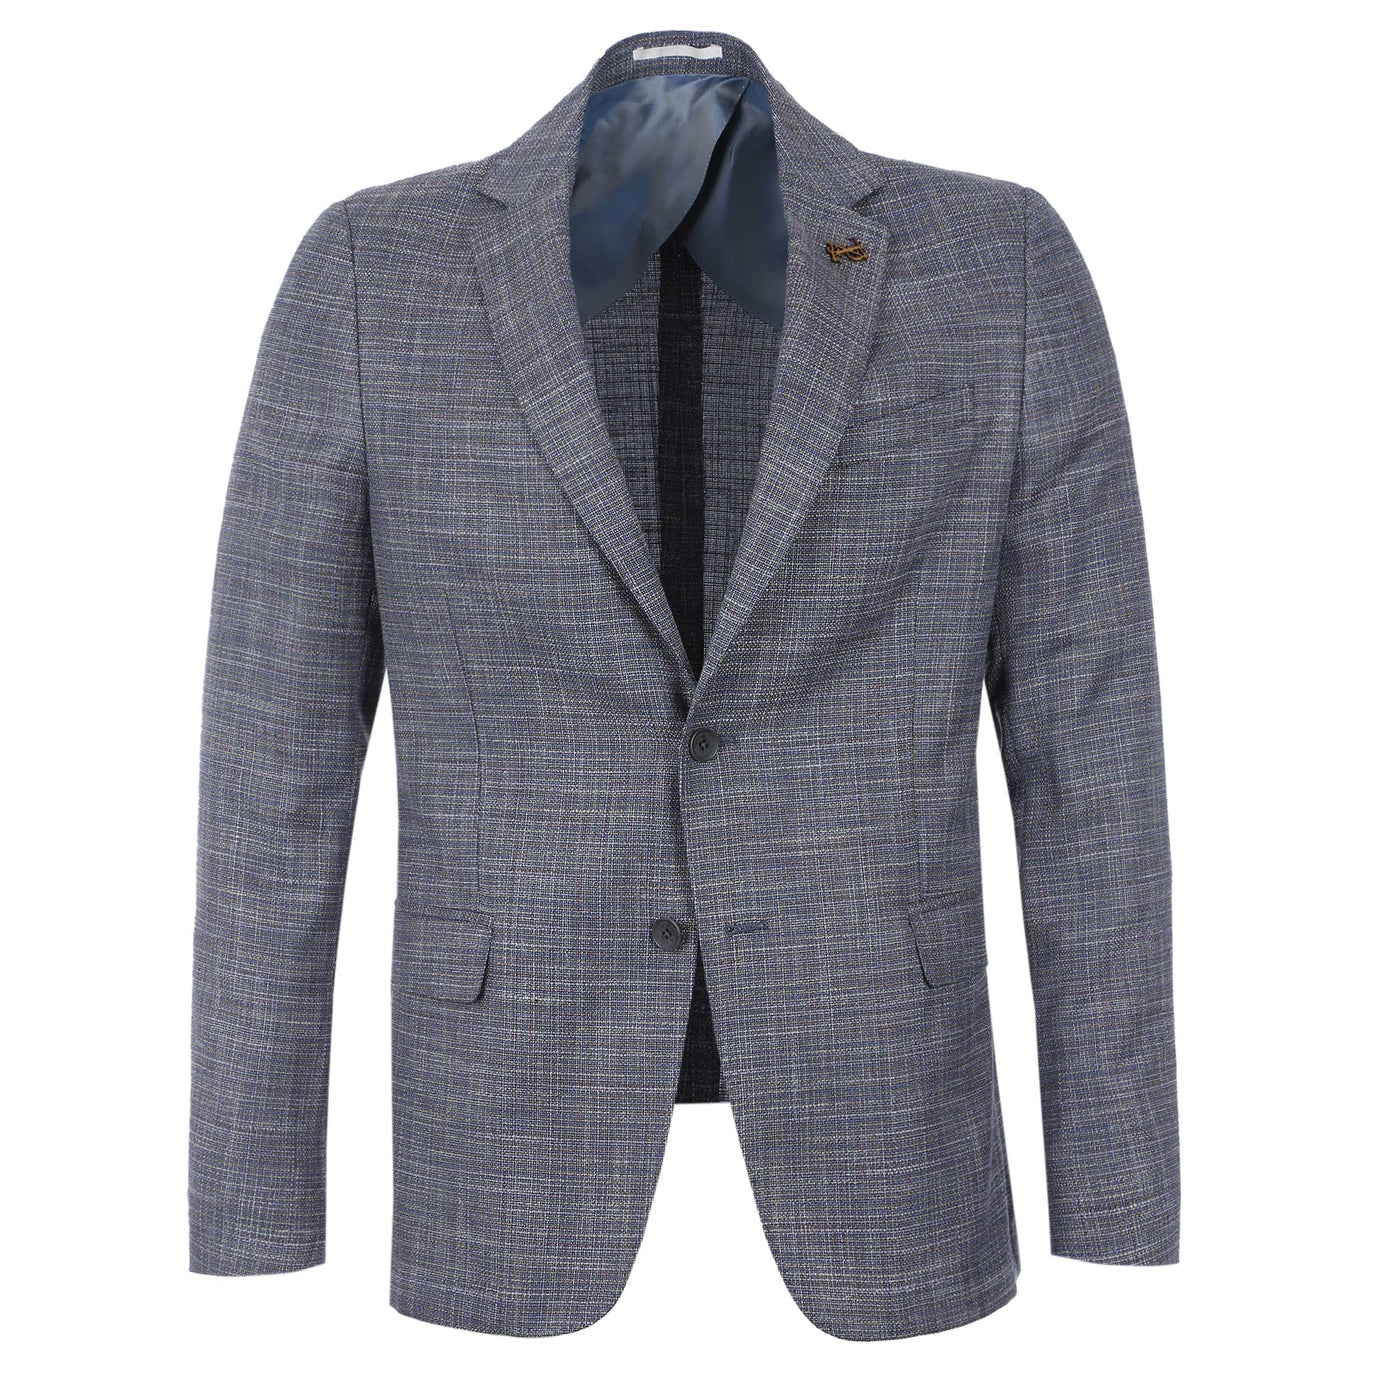 Pal Zileri Open Weave Blue Check Jacket in Blue Check